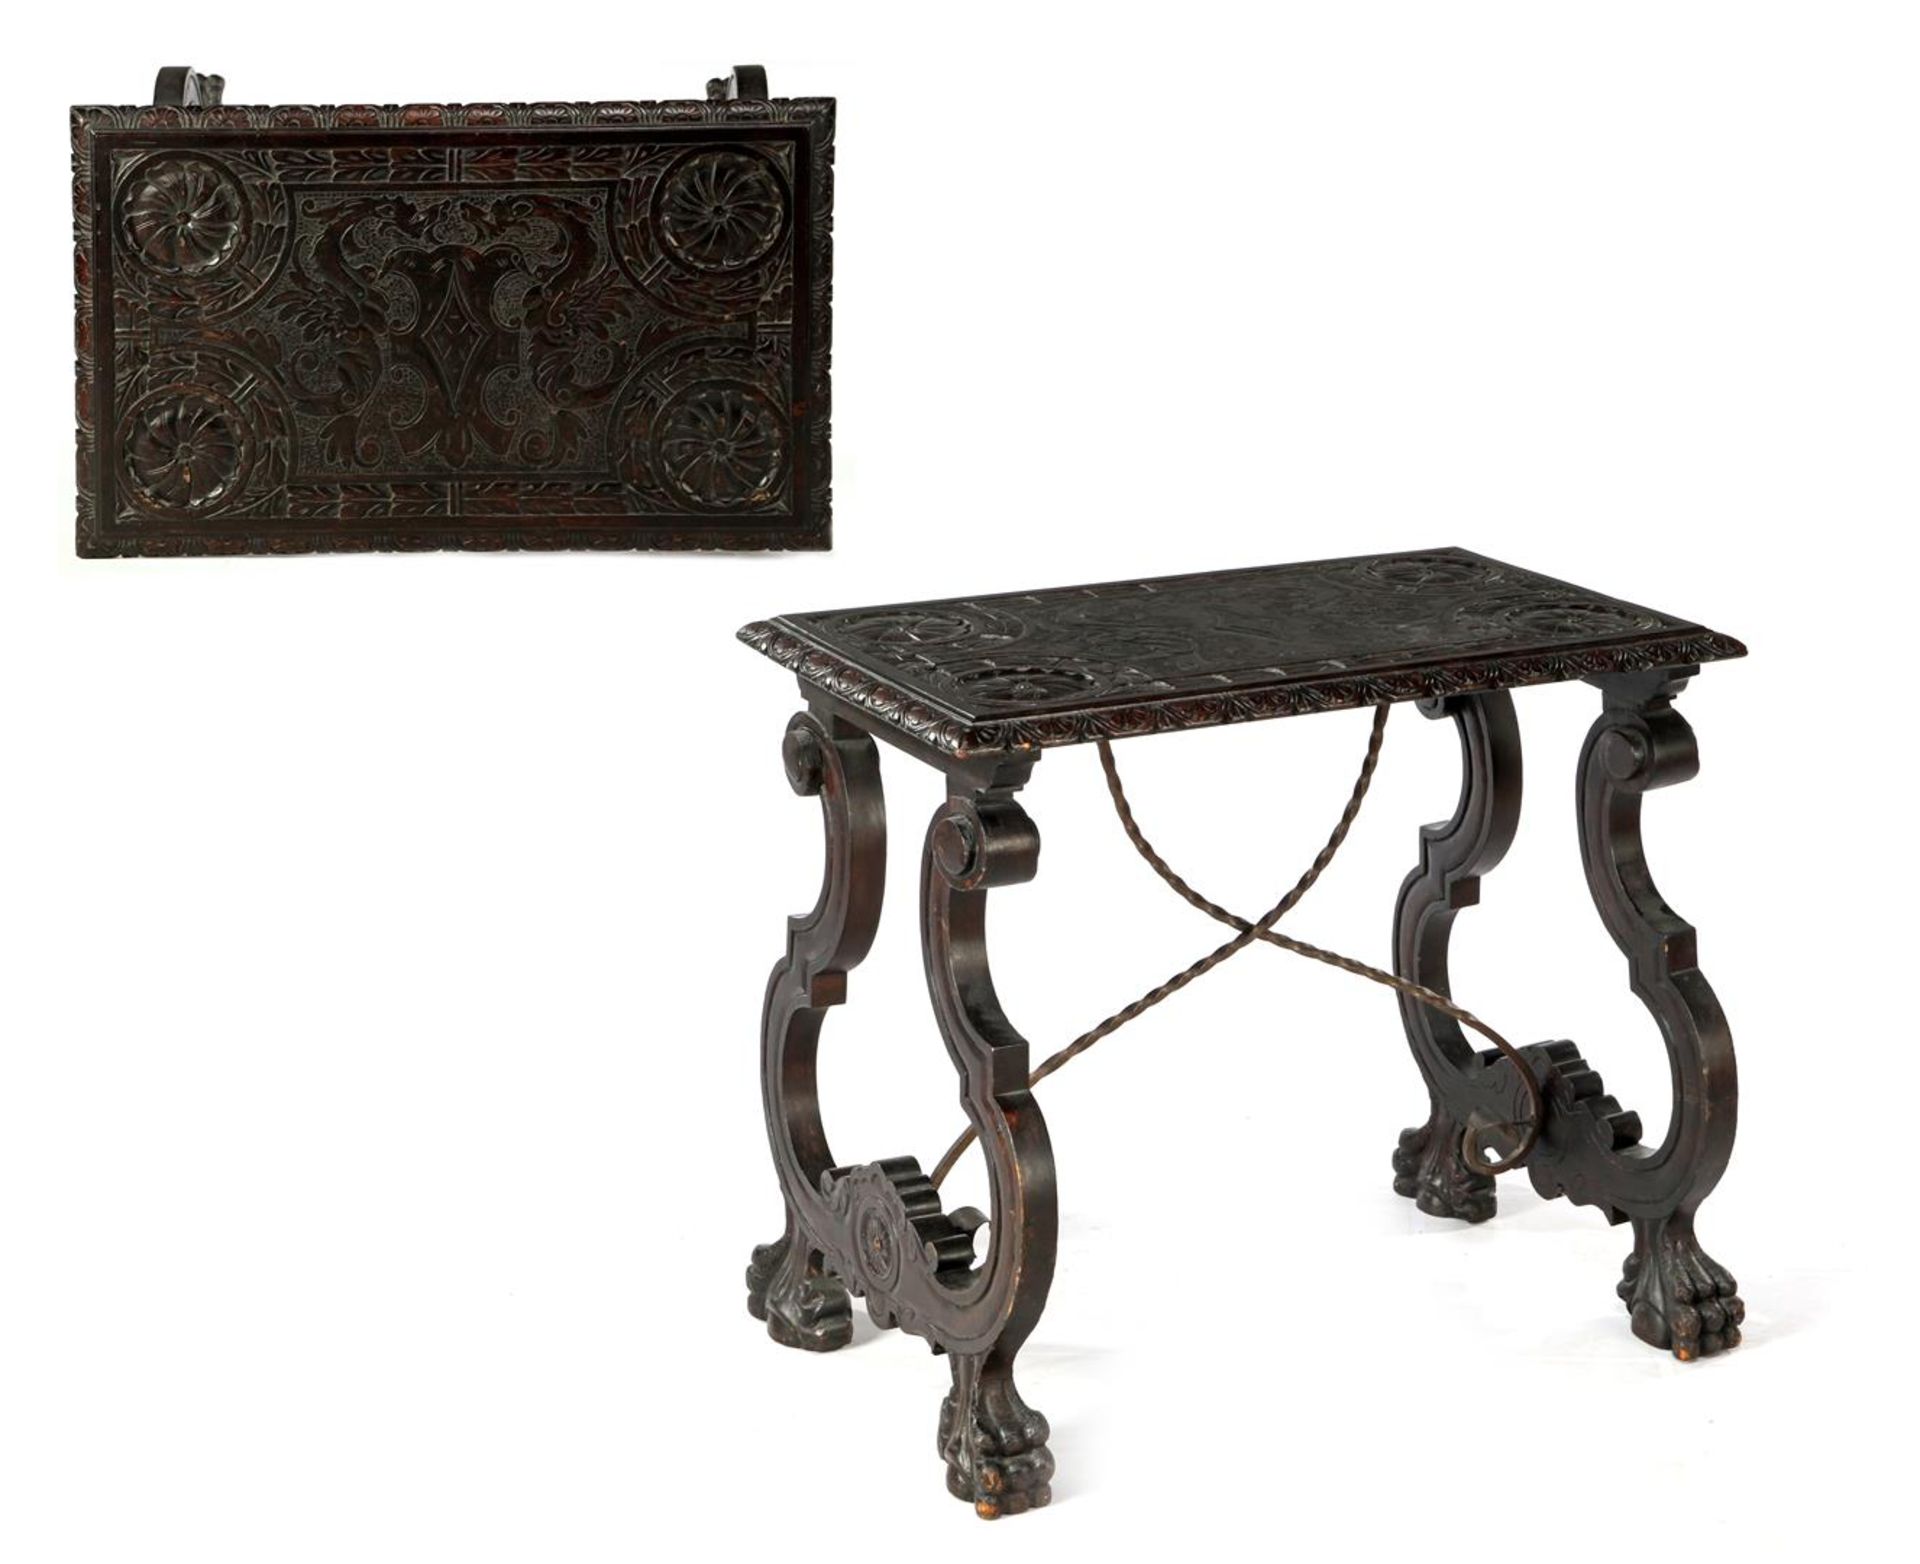 Spanish table with beautifully carved decoration